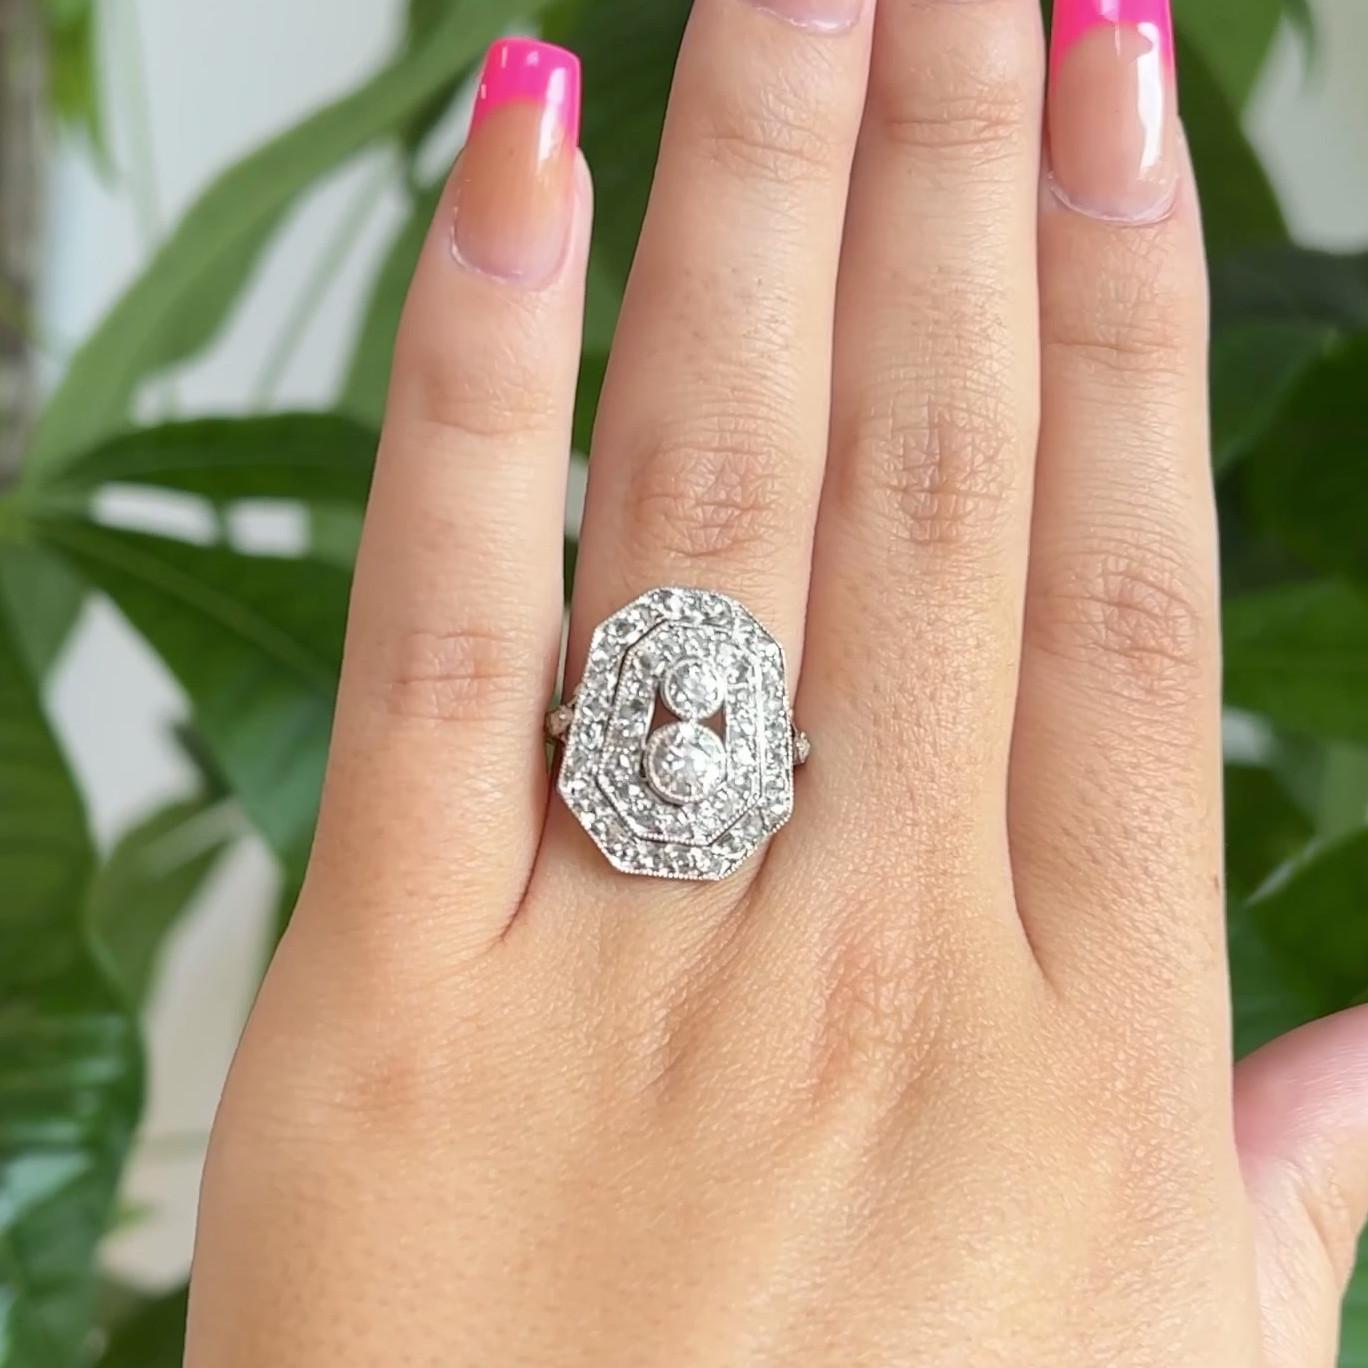 One Antique Old European Cut Diamond White Gold Double Halo Ring. Featuring one old European cut diamond of approximately 0.45 carat, and one old European cut diamond of approximately 0.20 carat, both graded G color, SI clarity. Accented by 12 old